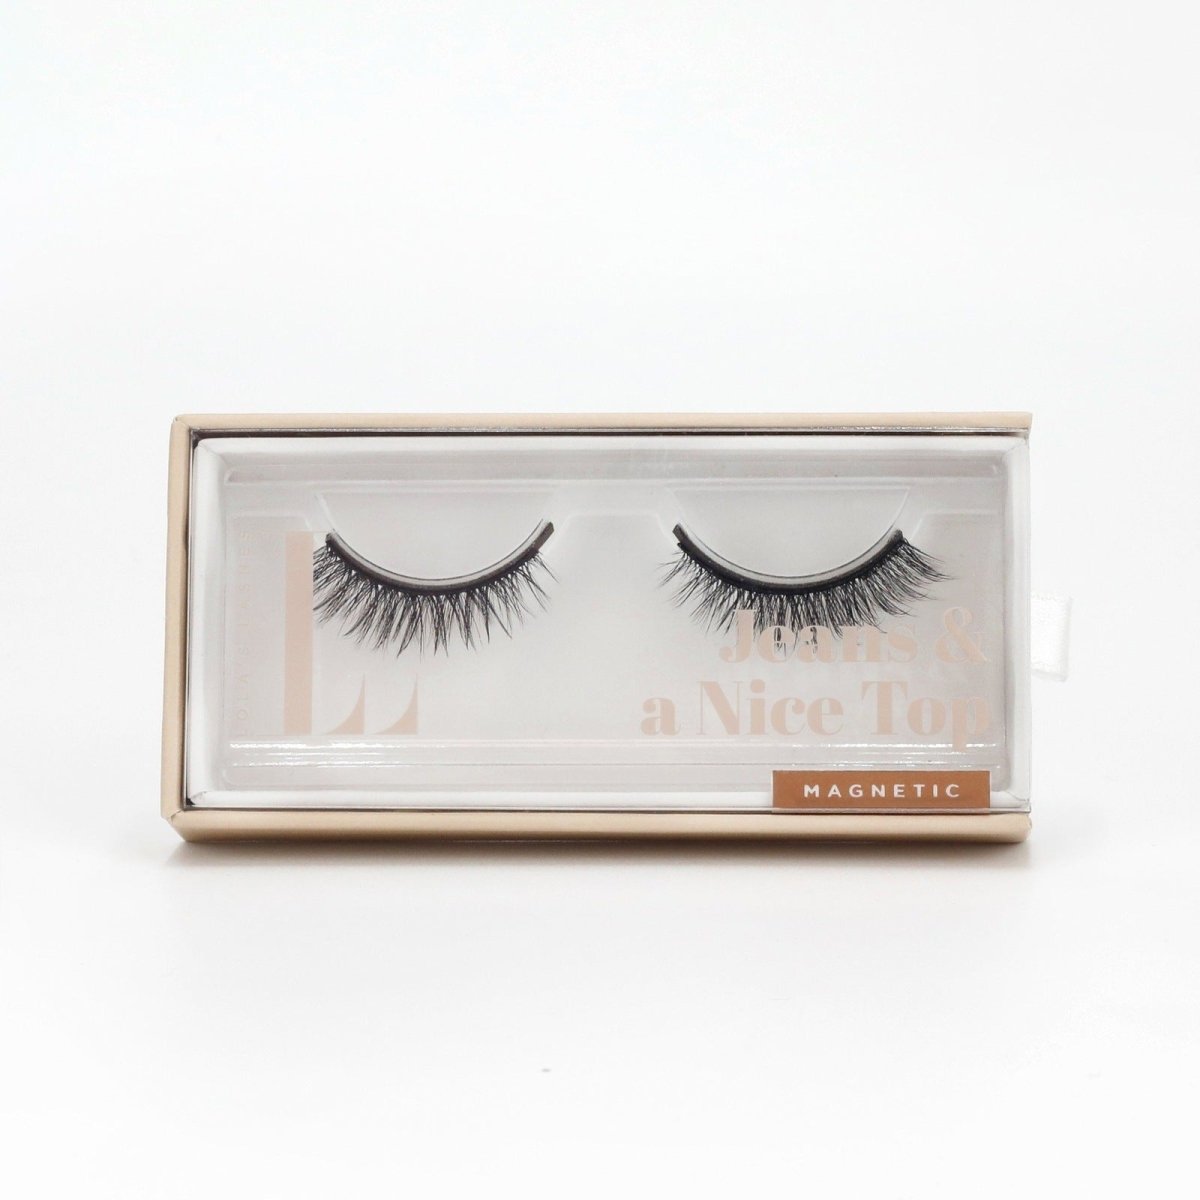 Jeans & a Nice Top Hybrid Magnetic Lash & Liner Kit - Lola's Lashes